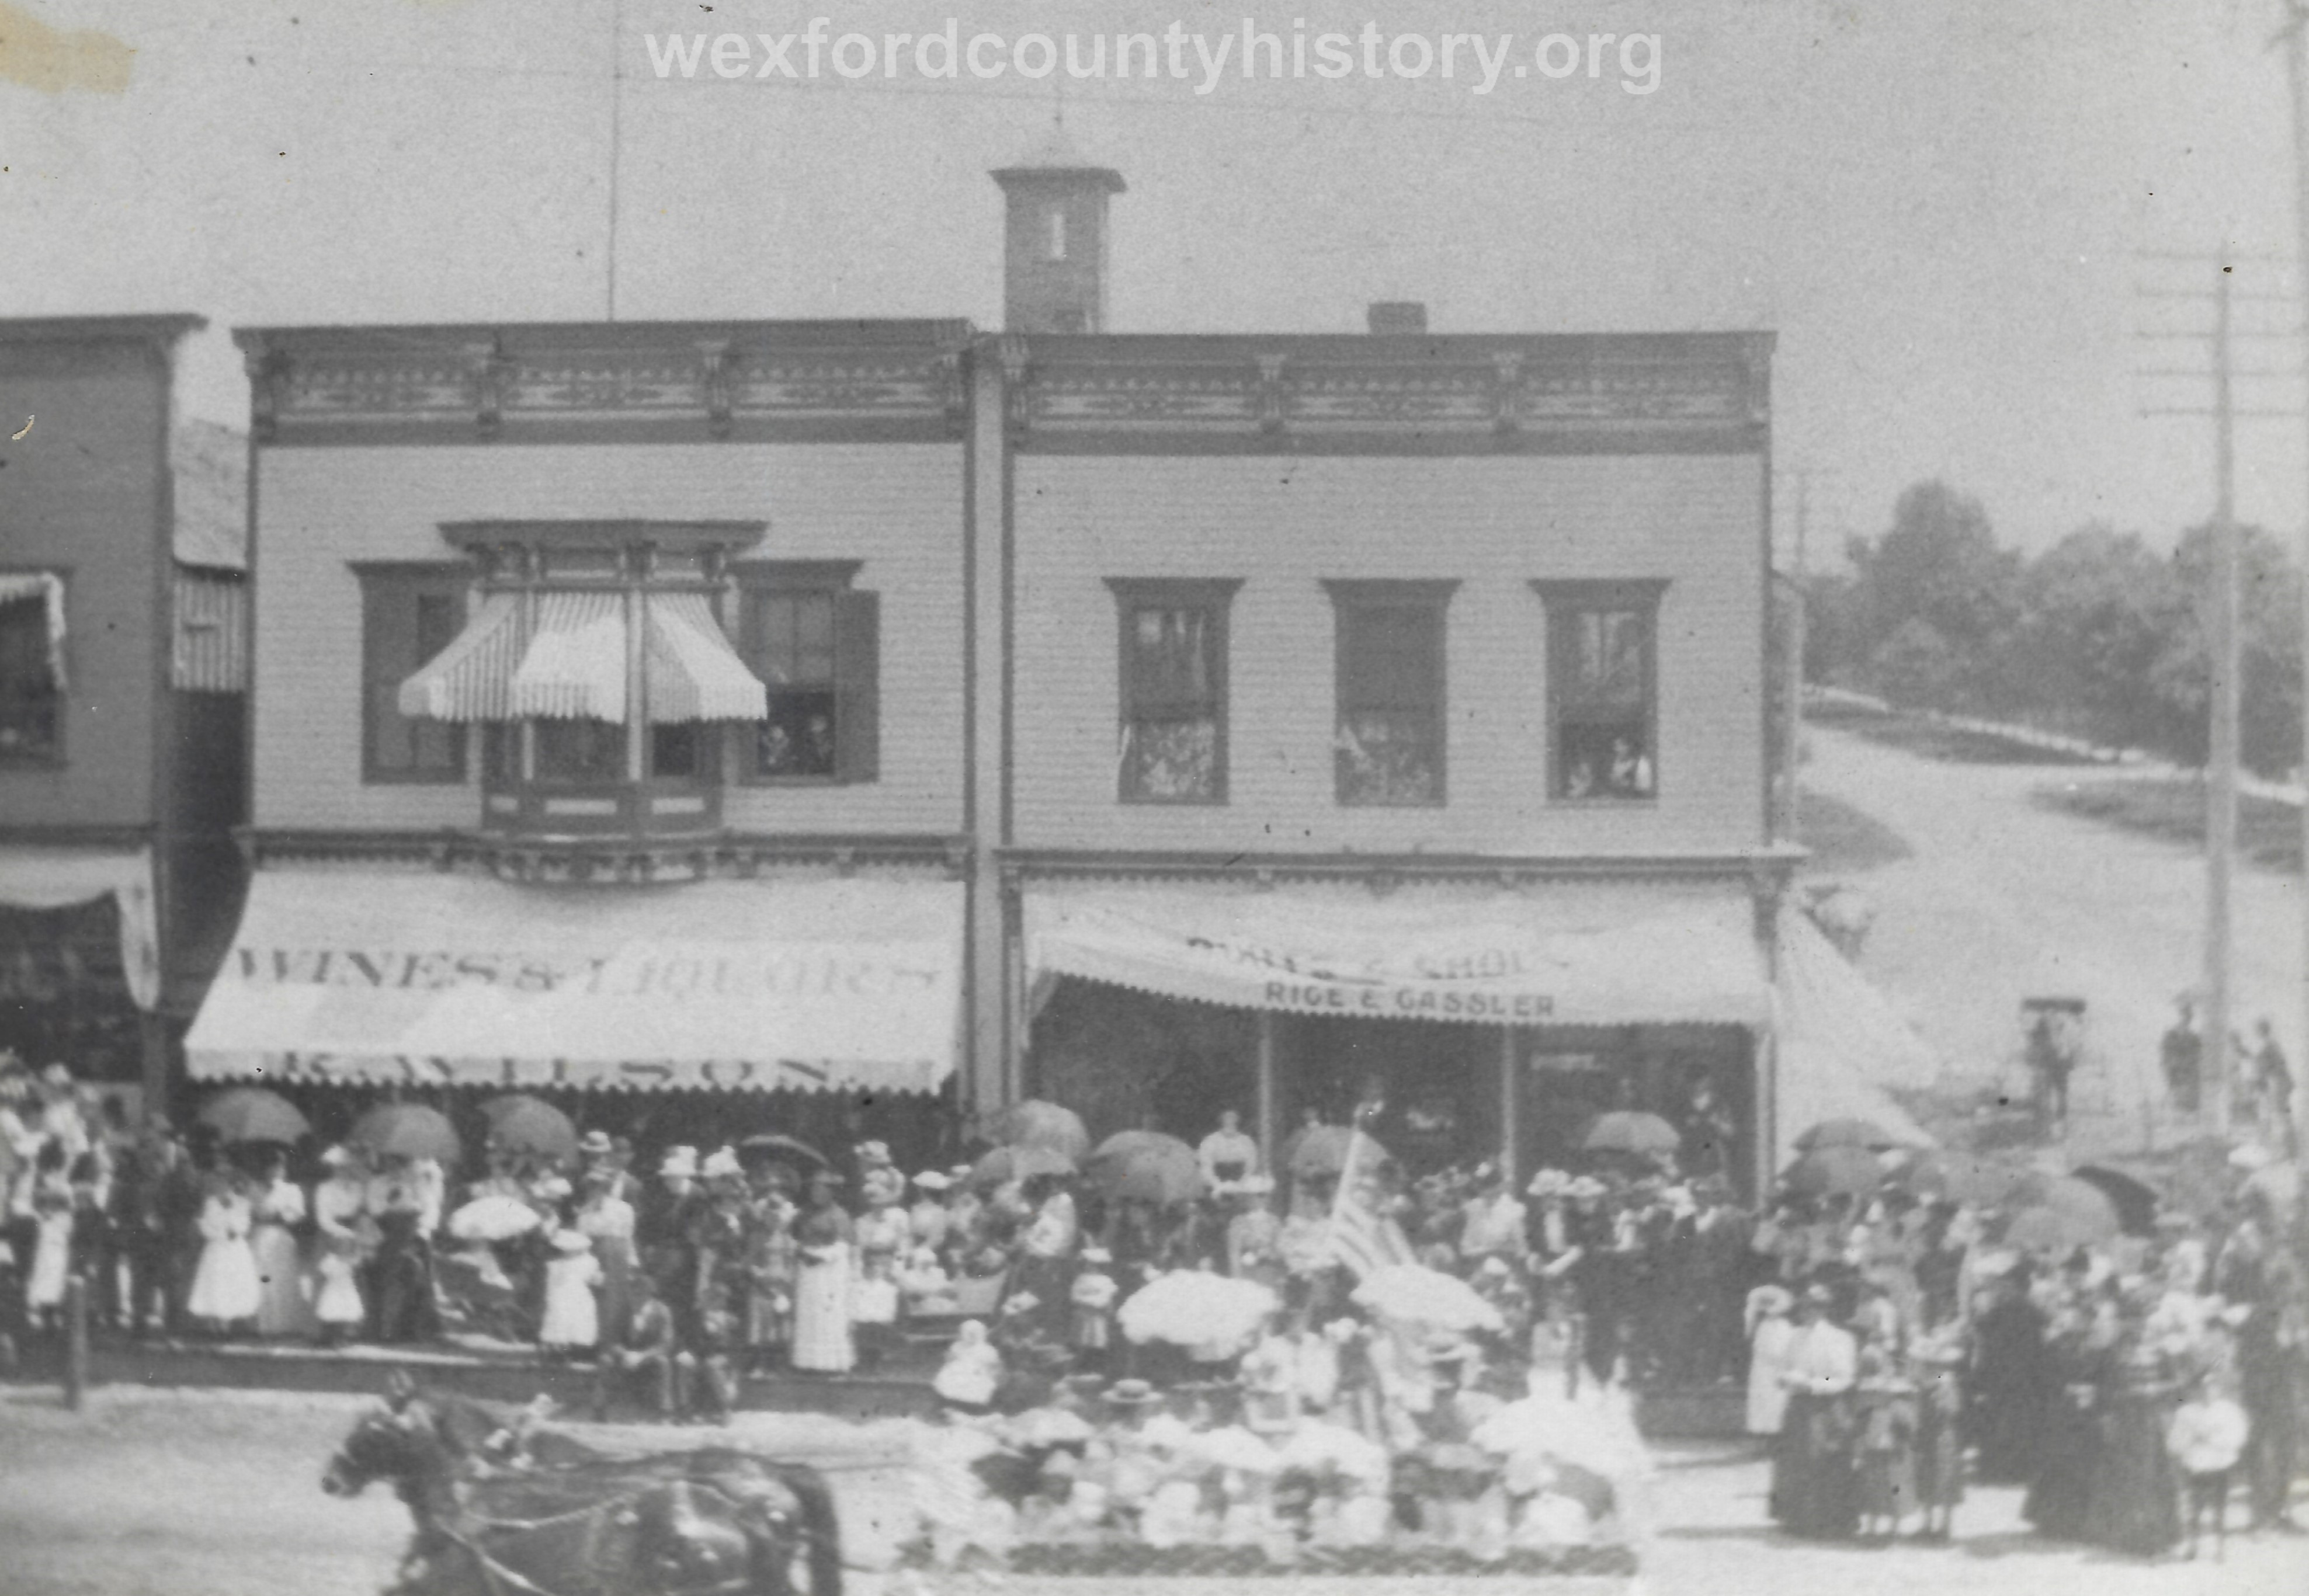 Cadillac-Parade-Early-1900s-parade-On-The-Corner-Of-Cass-And-South-Mitchell-Wilsons-Saloon-and-the-Rice-And-Cassler-Business-are-in-the-background